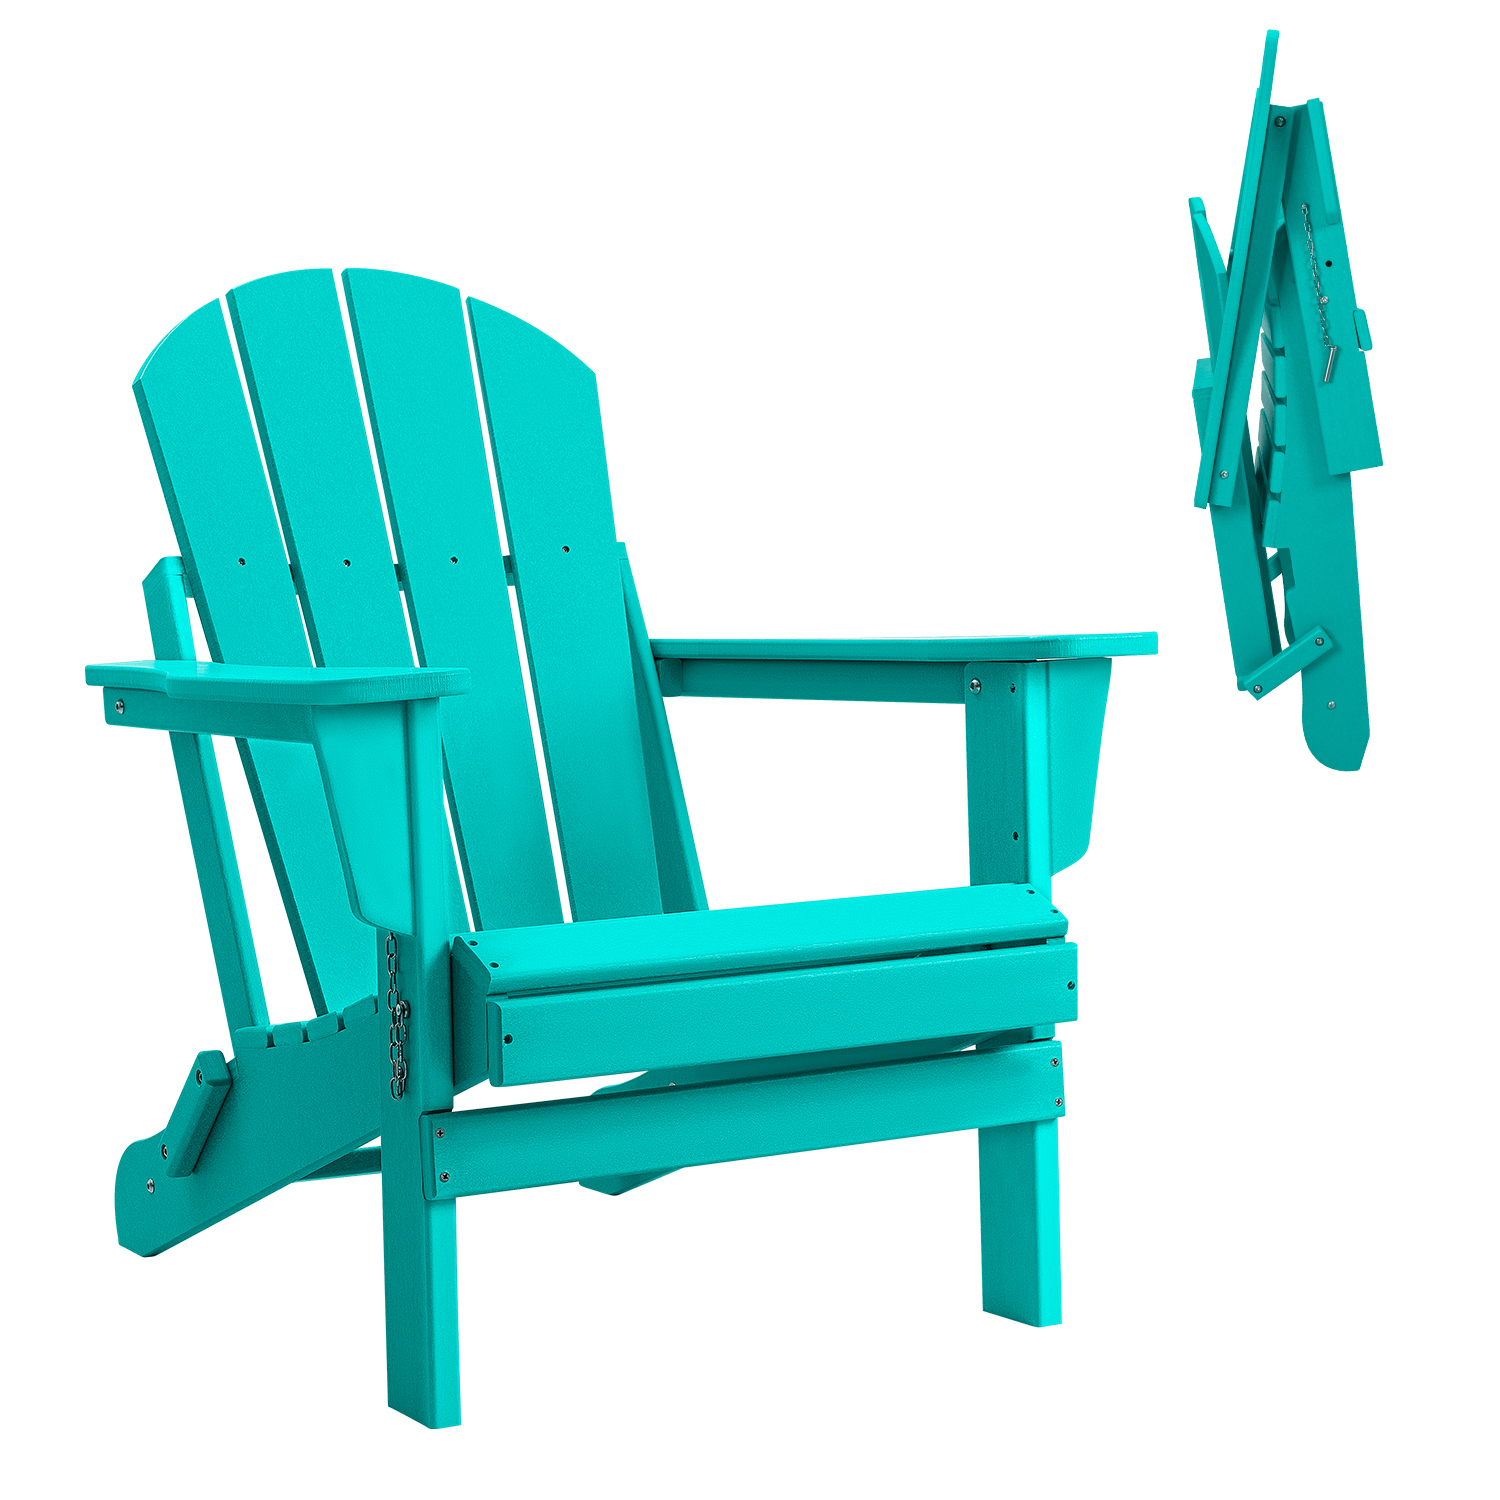 Devoko Folding Adirondack Chair HDPE Outdoor Lounge Chair Weather Resistant & Portable (One Chair Only), Turquoise - image 2 of 7